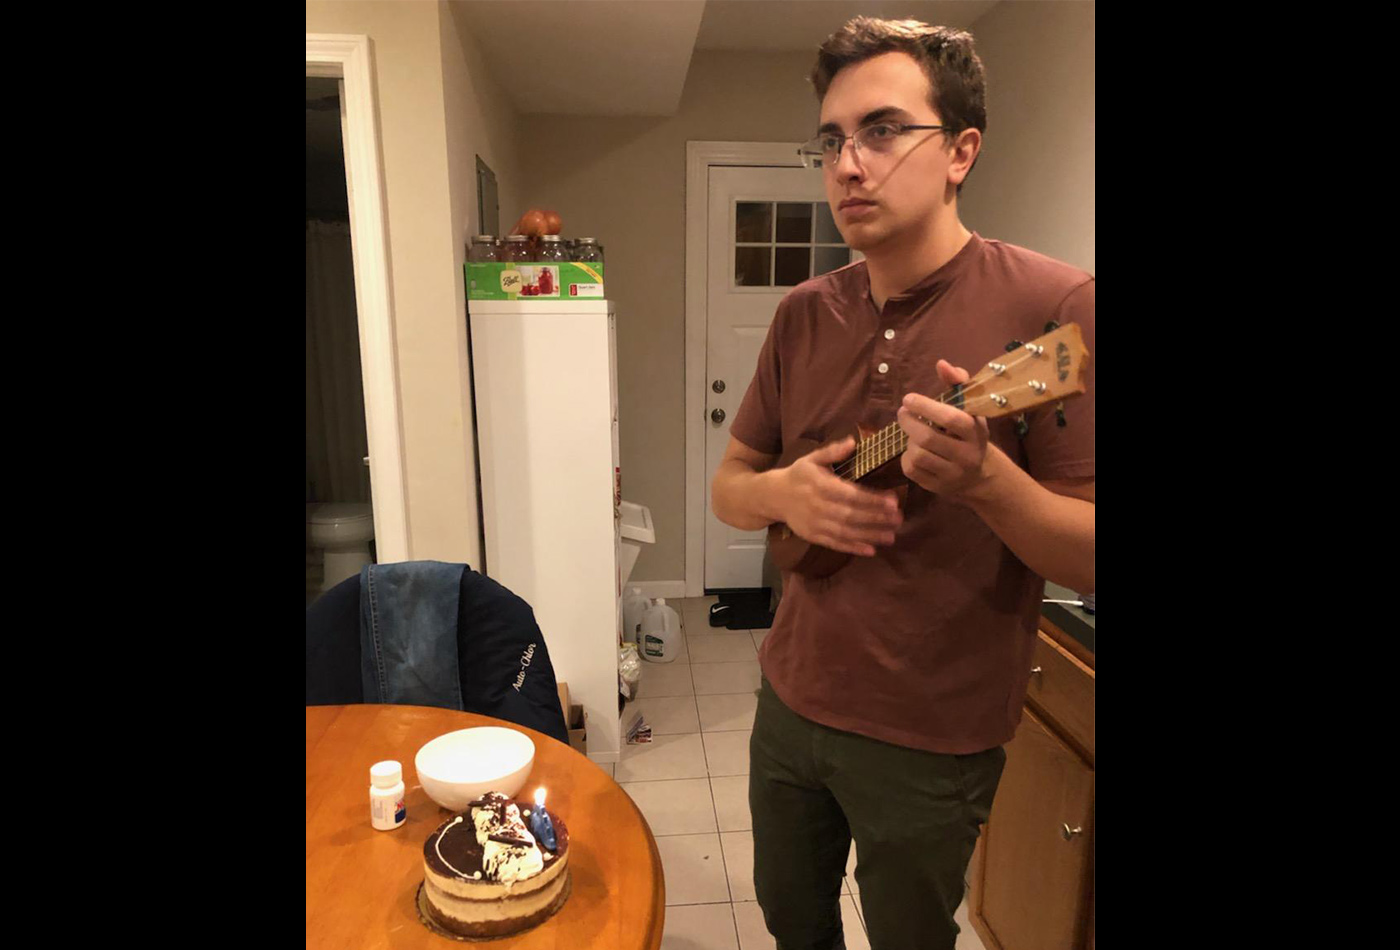 A male graduate student plays a ukelele in front of a cake with a lit candle on it.